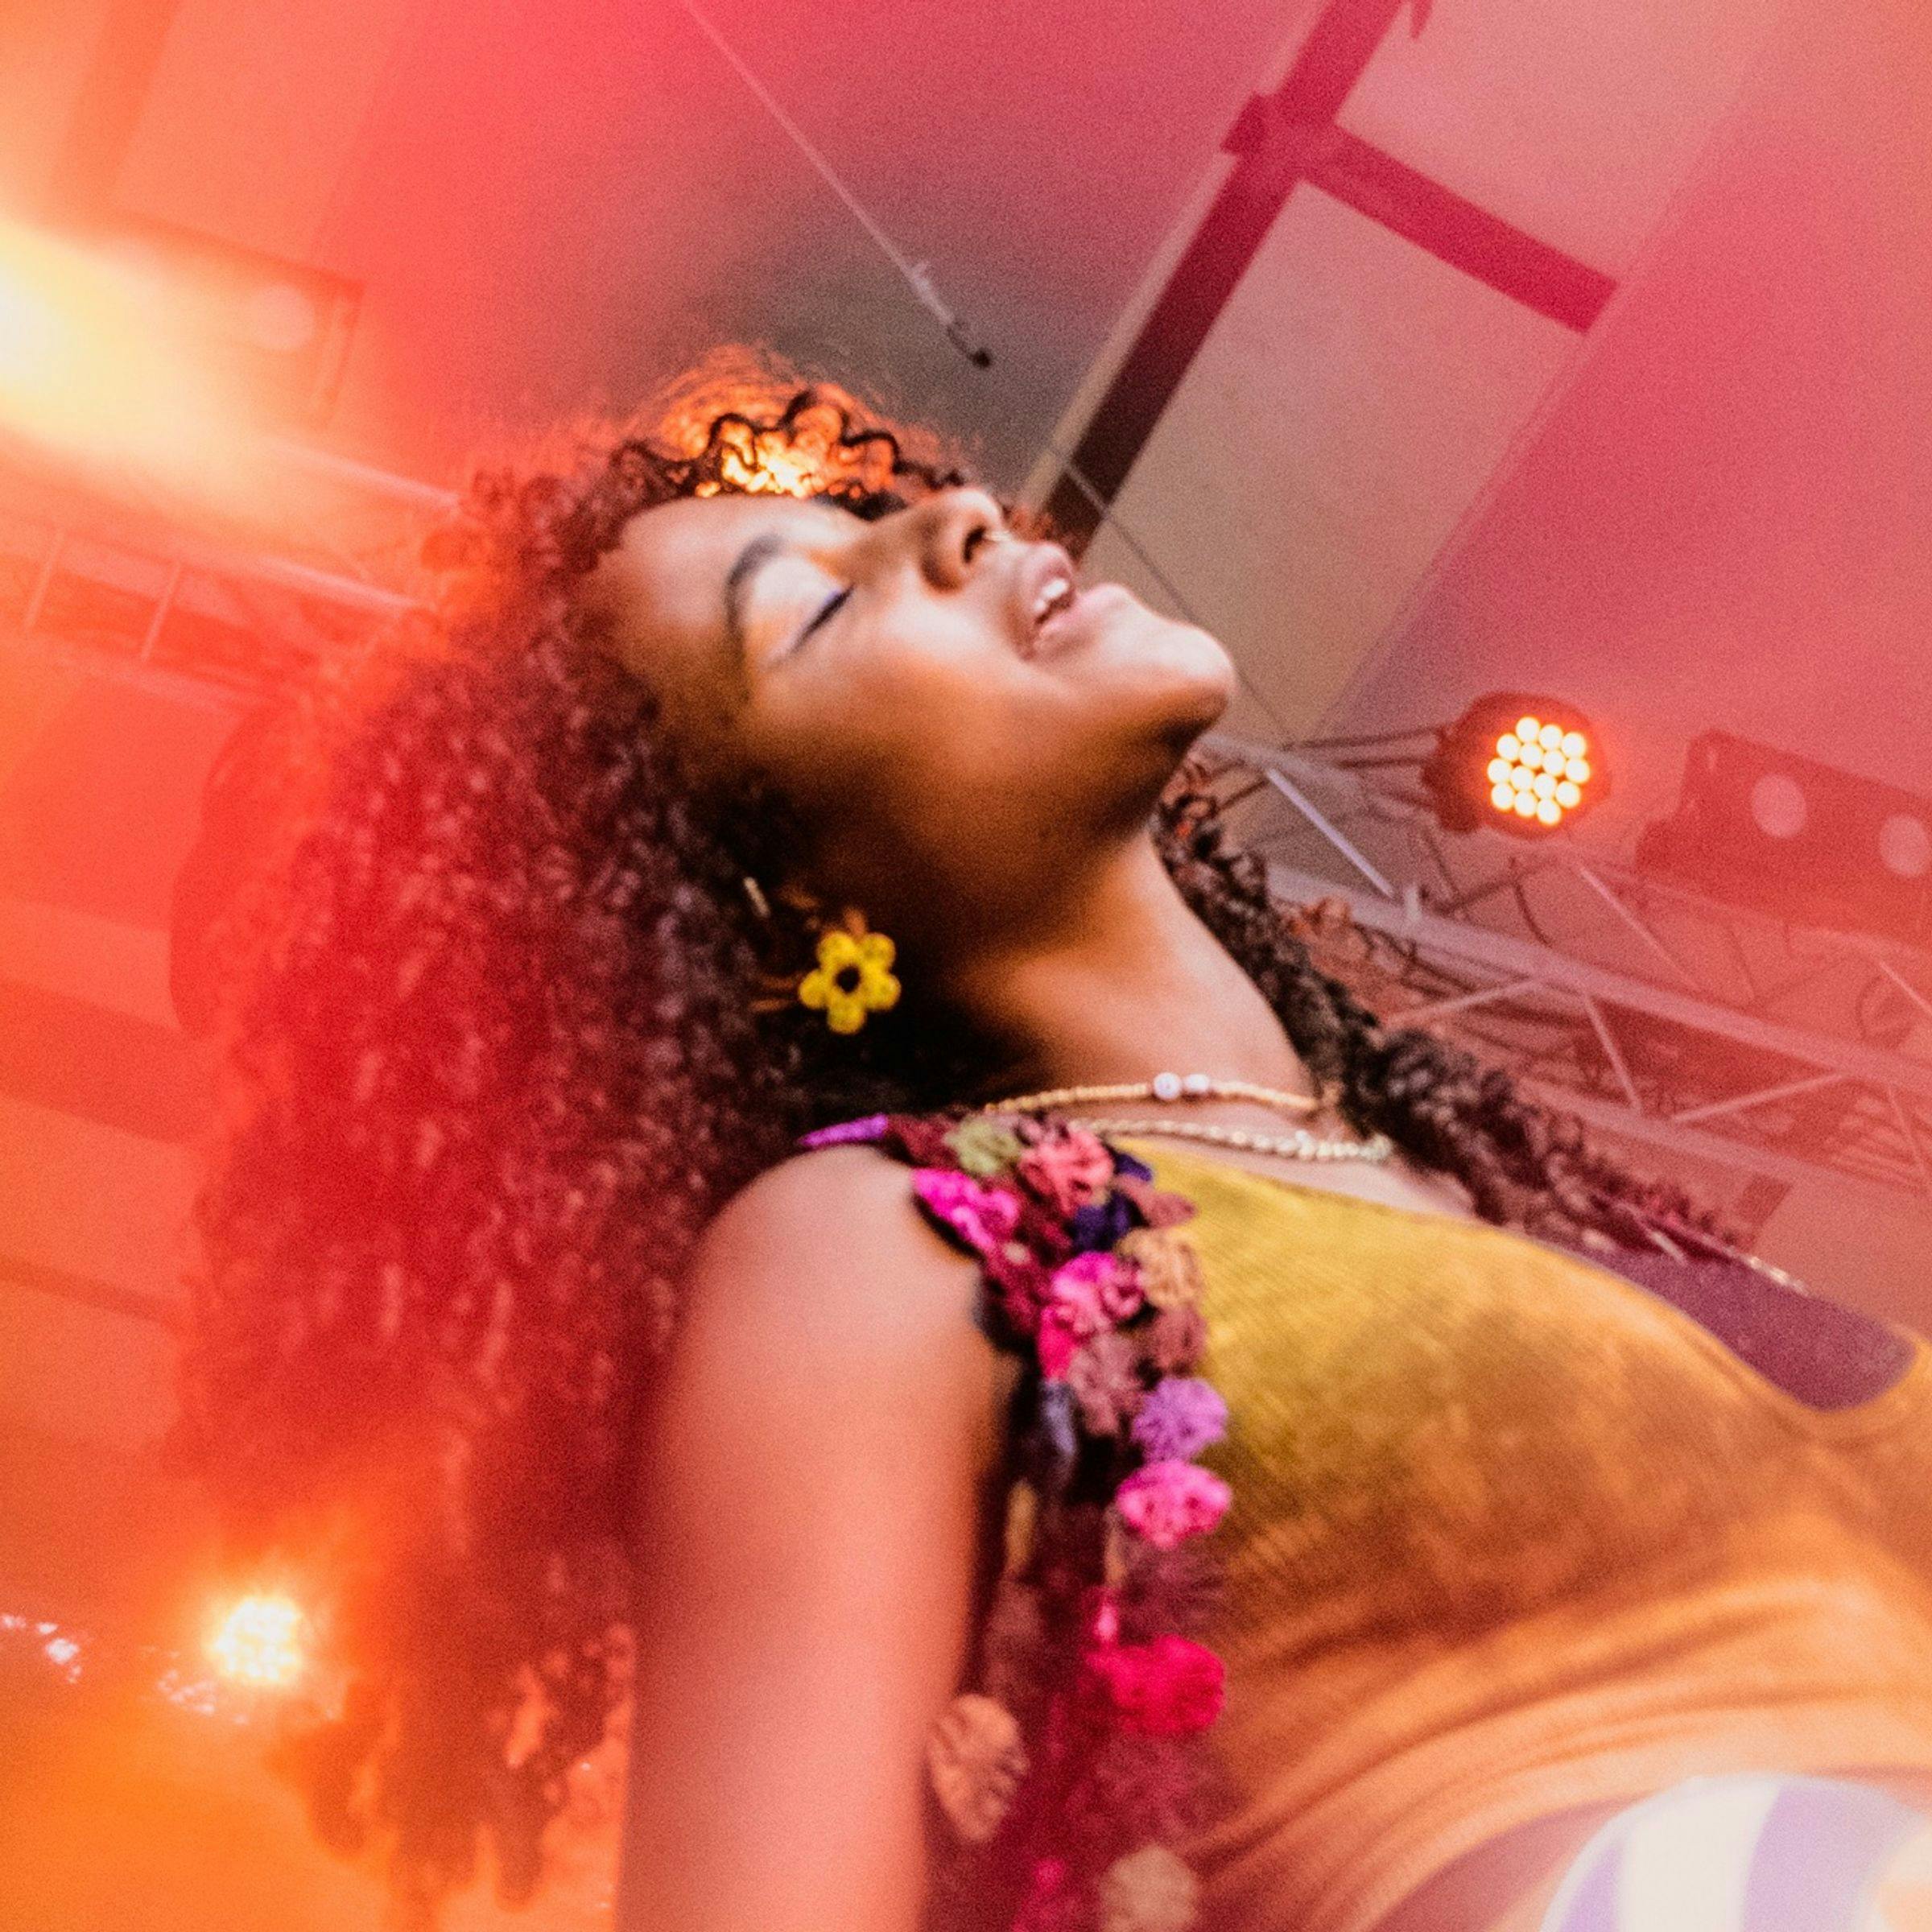 Uche Yara is being photographed from a low angle at one of her concerts. She is singing and has her eyes closed.